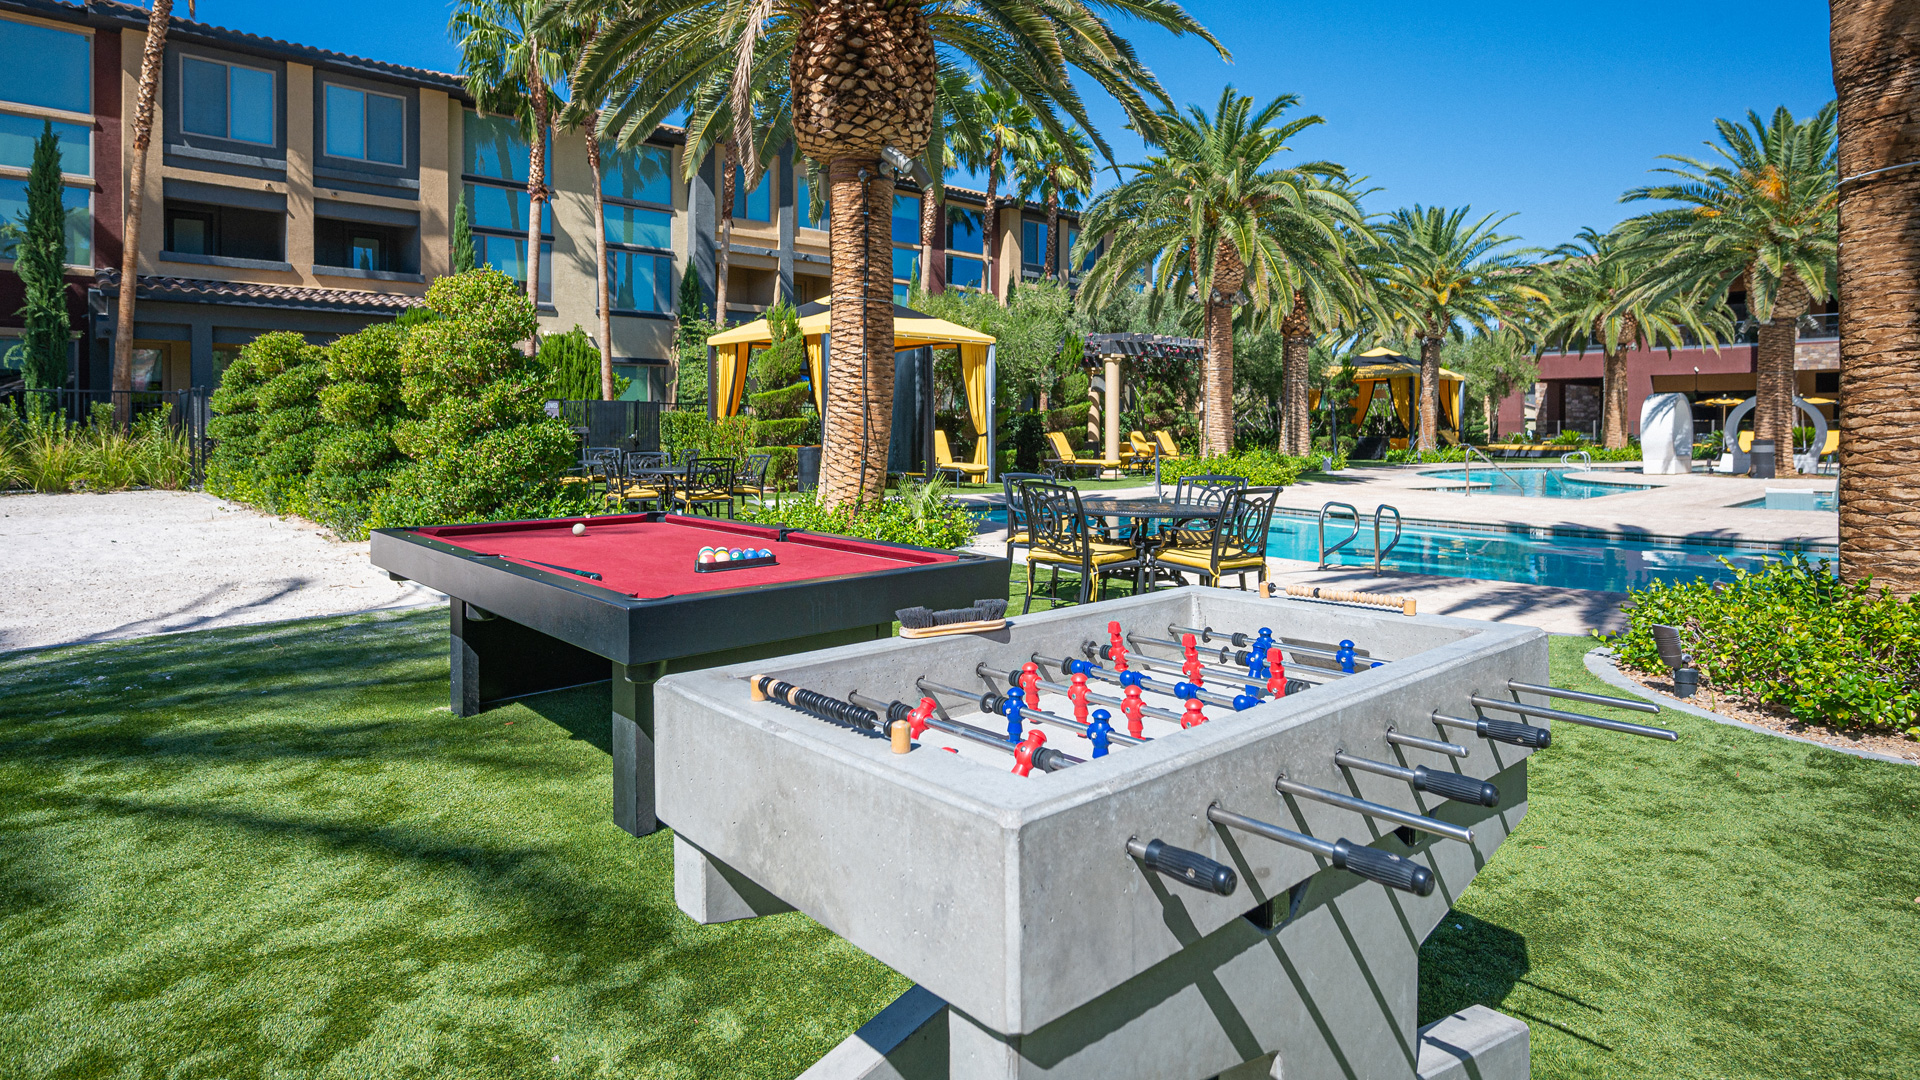 Outdoor Games with pool table and foosball